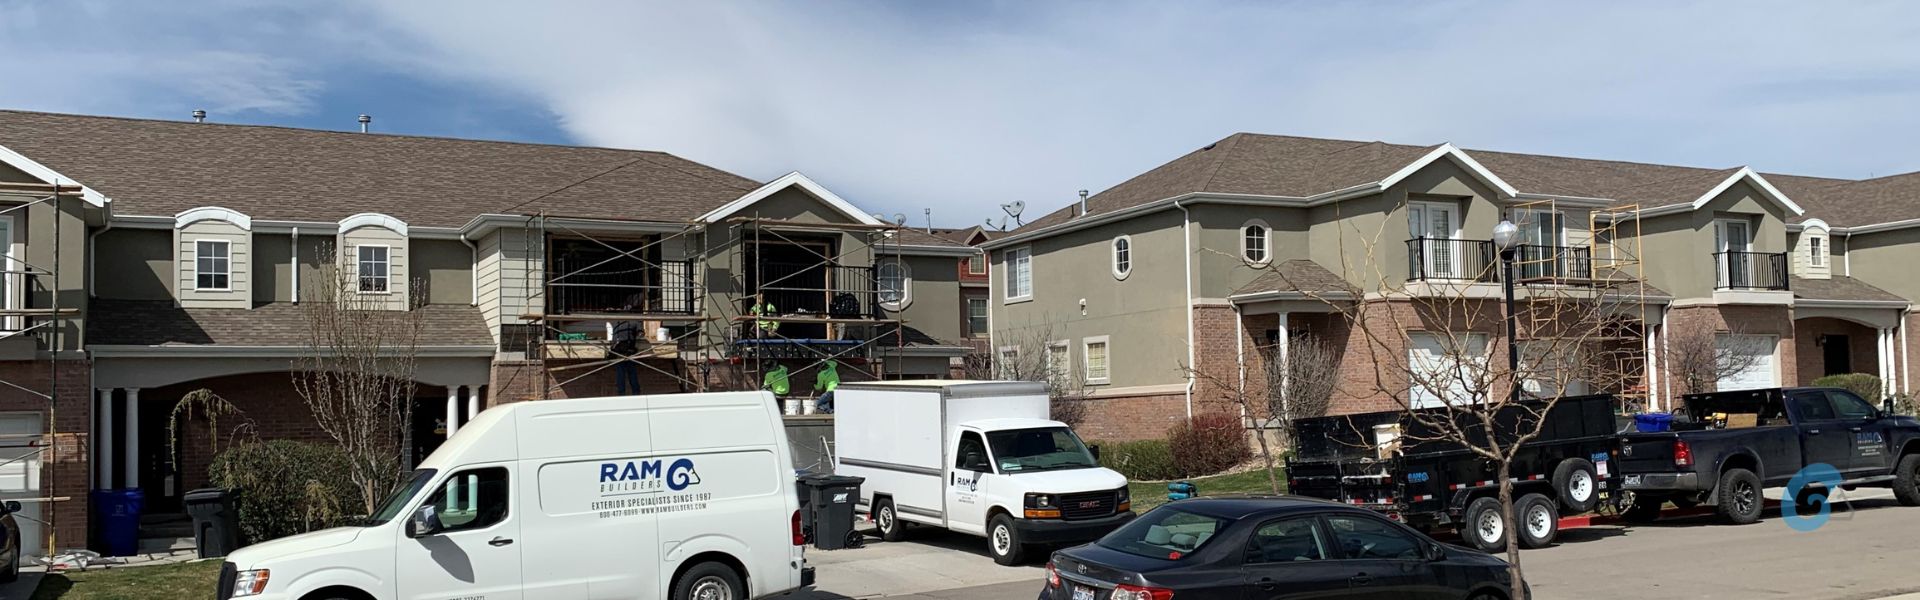 Multi Unit Exterior Stucco Repair and Remodeling Contractor